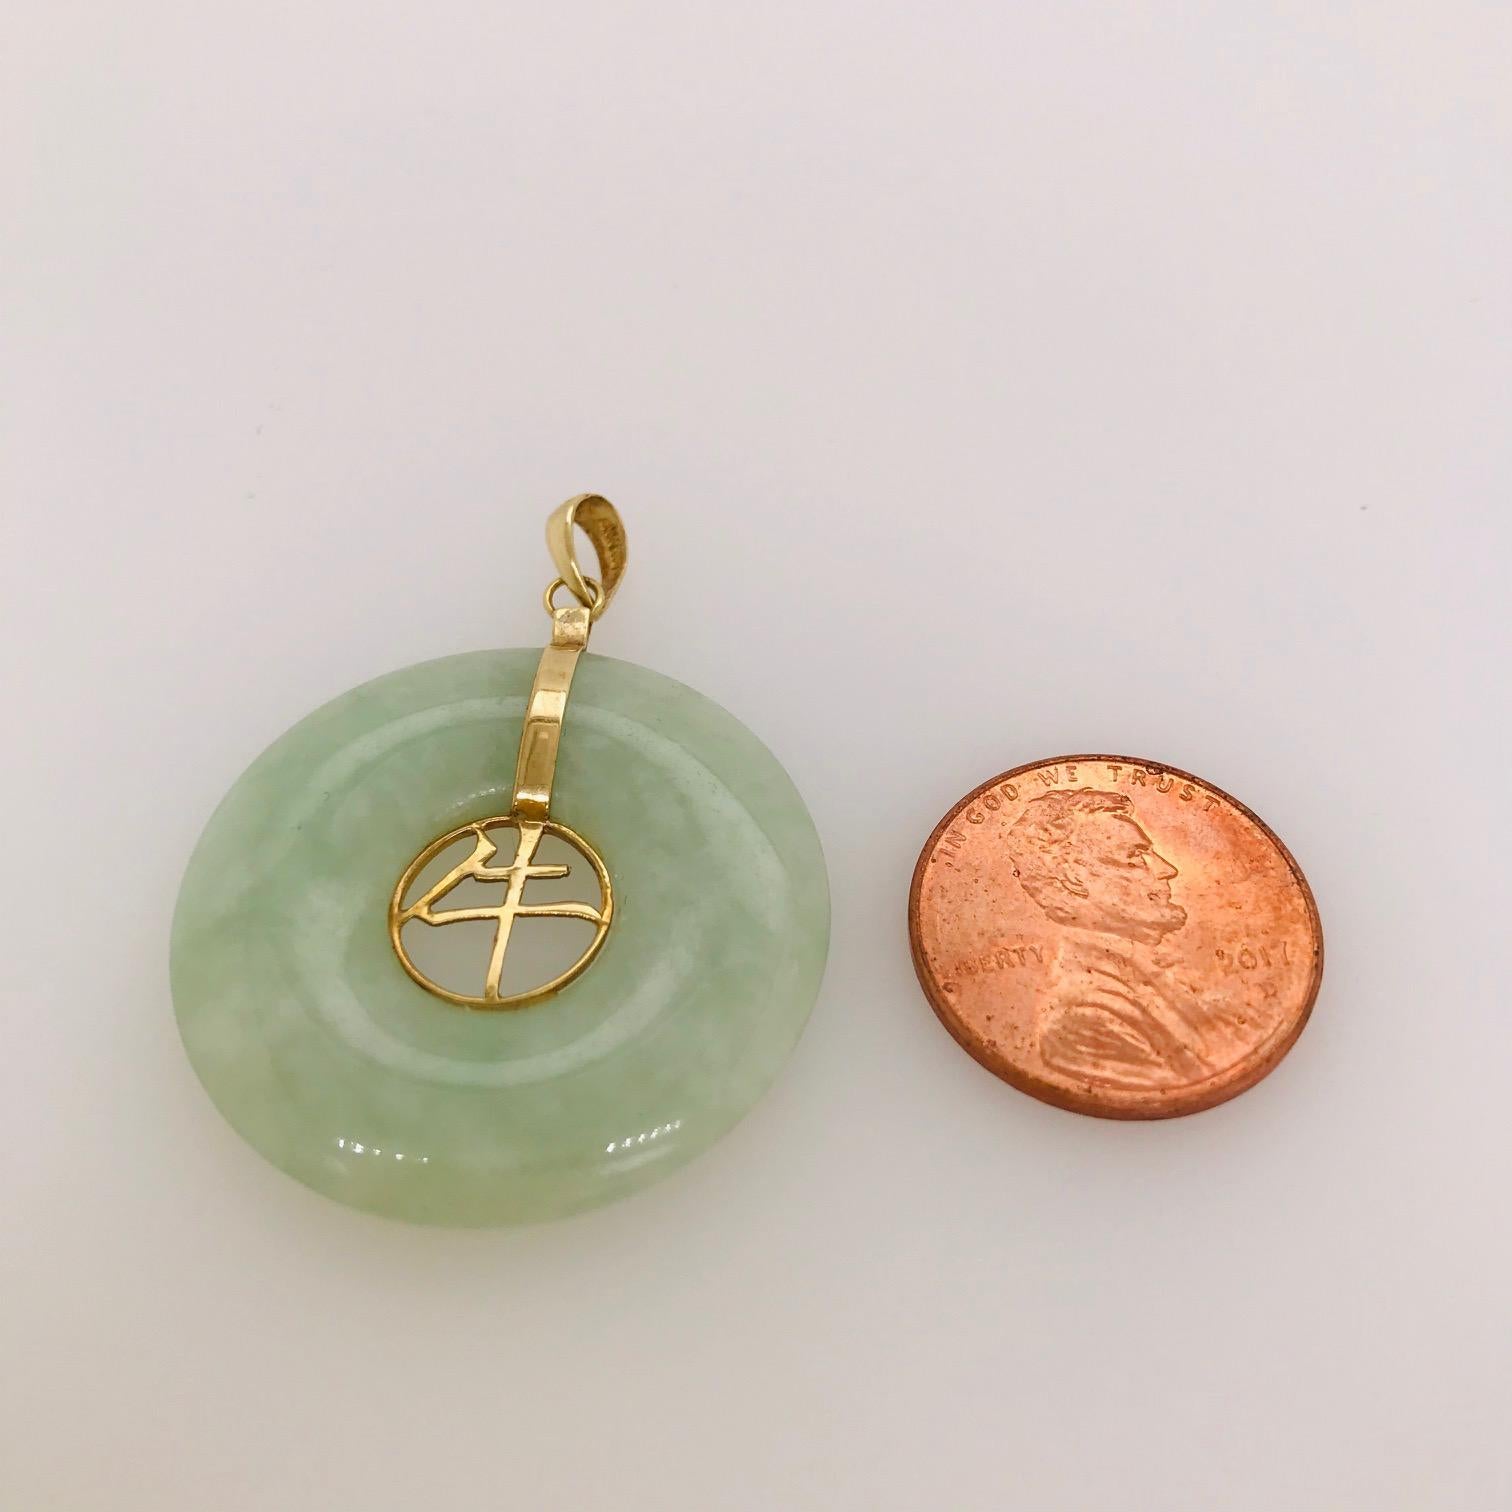 Round Cut Fortune Chinese Jade Pi 'Disk' Pendant in 14 Karat Gold, Neolithic Design